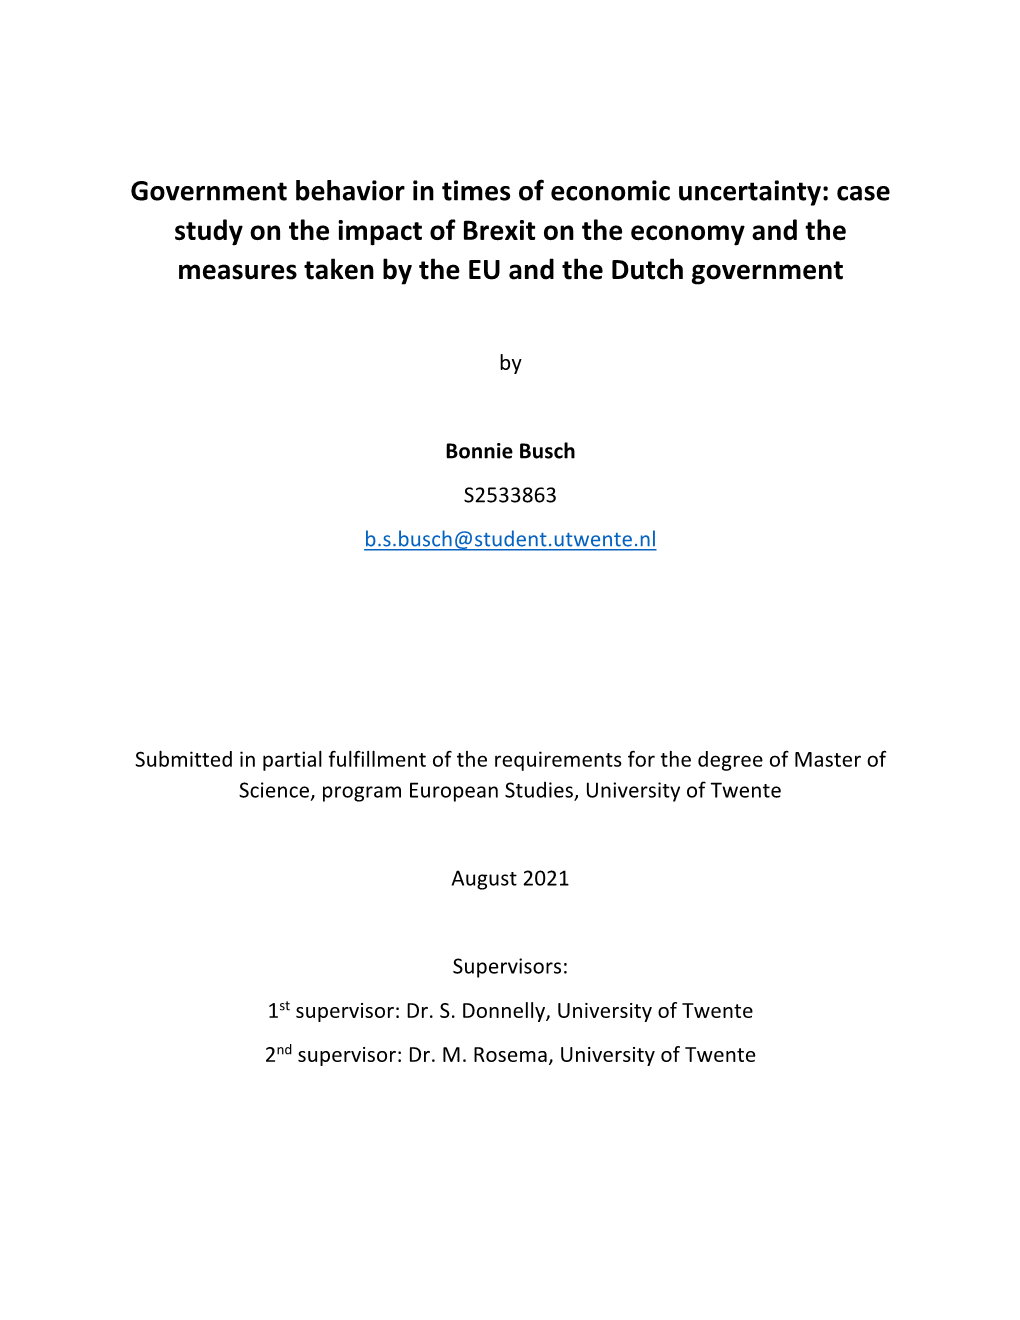 Government Behavior in Times of Economic Uncertainty: Case Study on the Impact of Brexit on the Economy and the Measures Taken by the EU and the Dutch Government